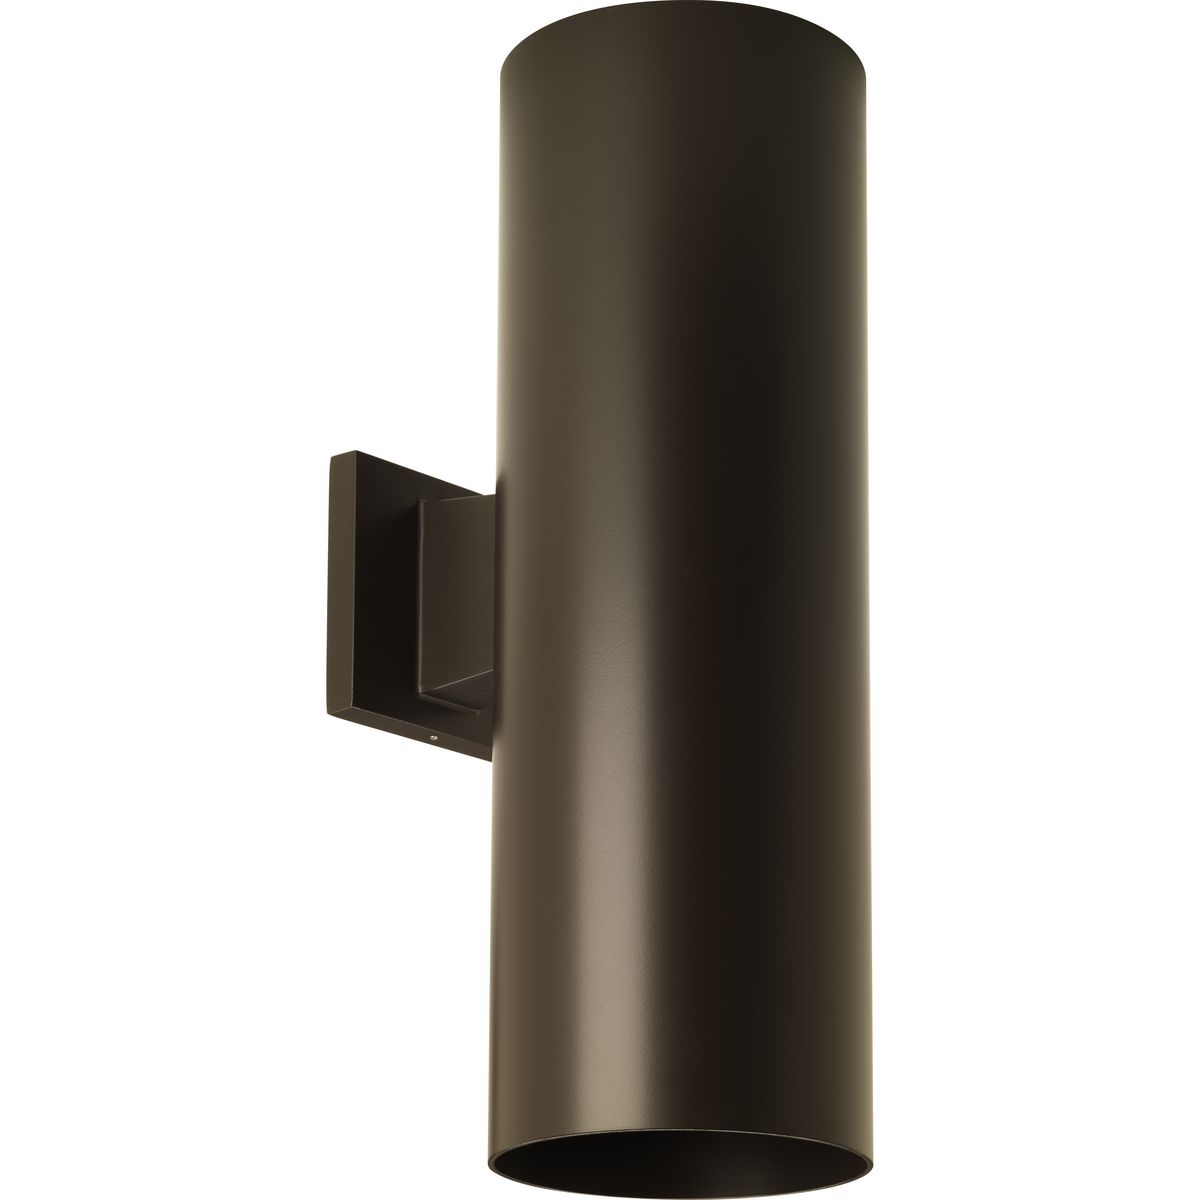 6" LED Outdoor Up/Down Wall Cylinder - Damp Location Listed - Model P5642-82/30K